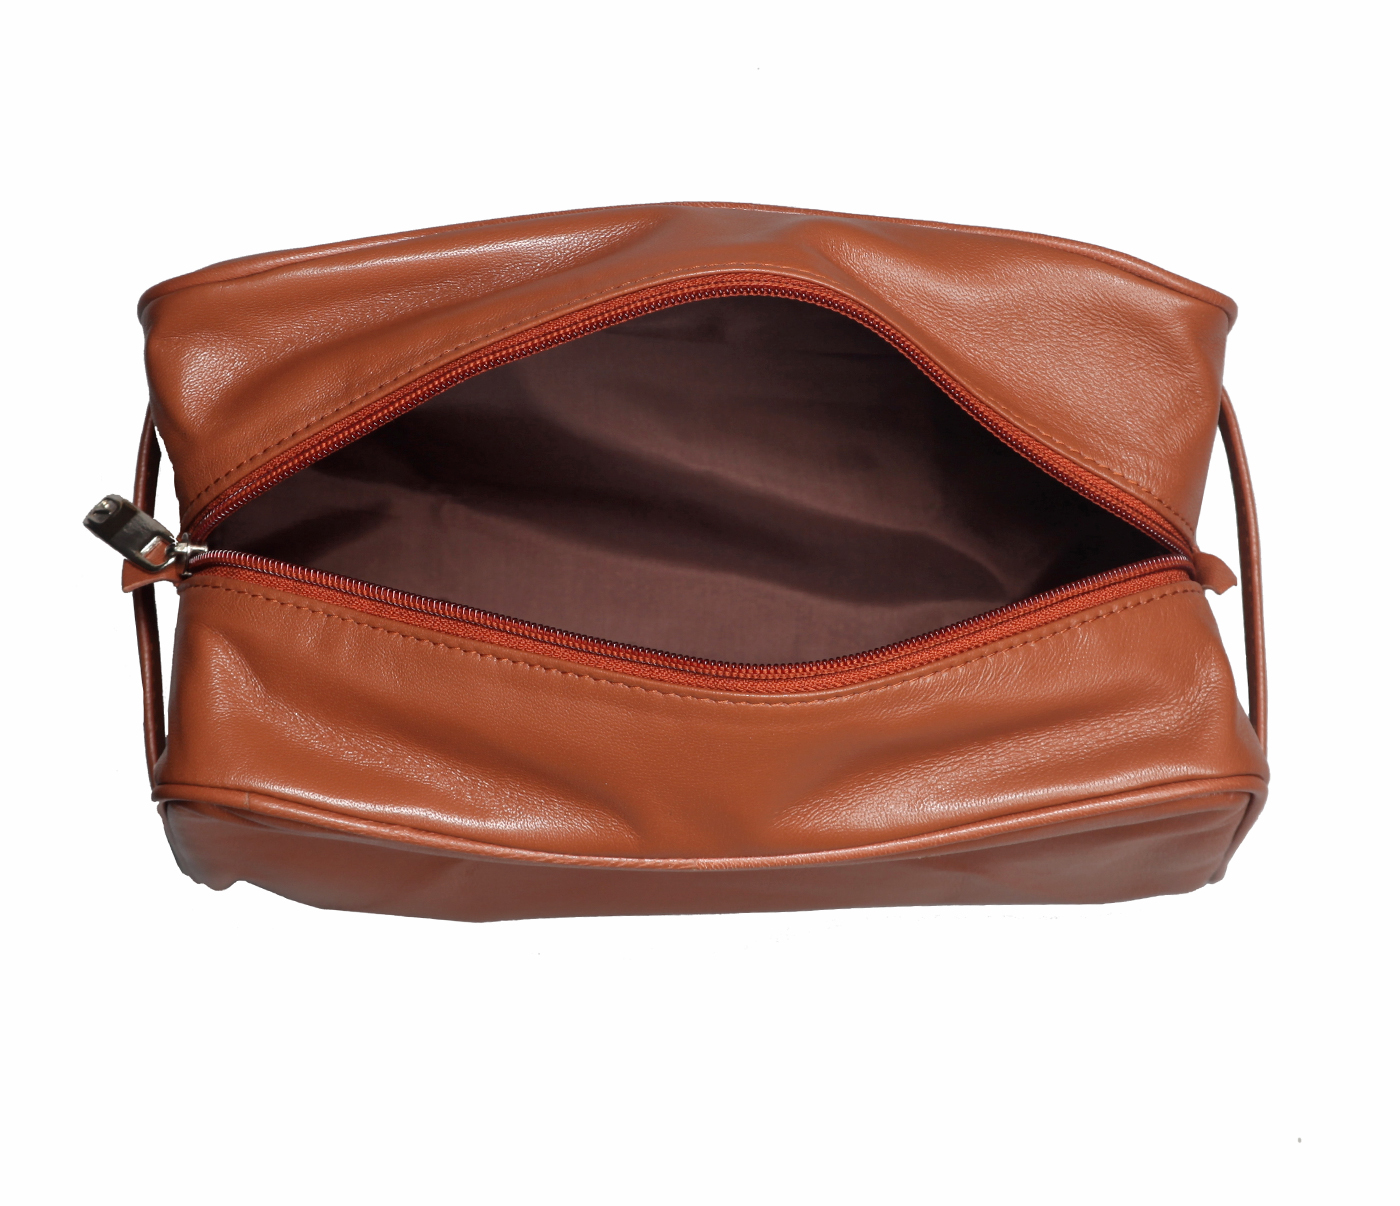 Travel Essential--Unisex Wash & Toiletry travel Bag in Genuine Leather - Tan